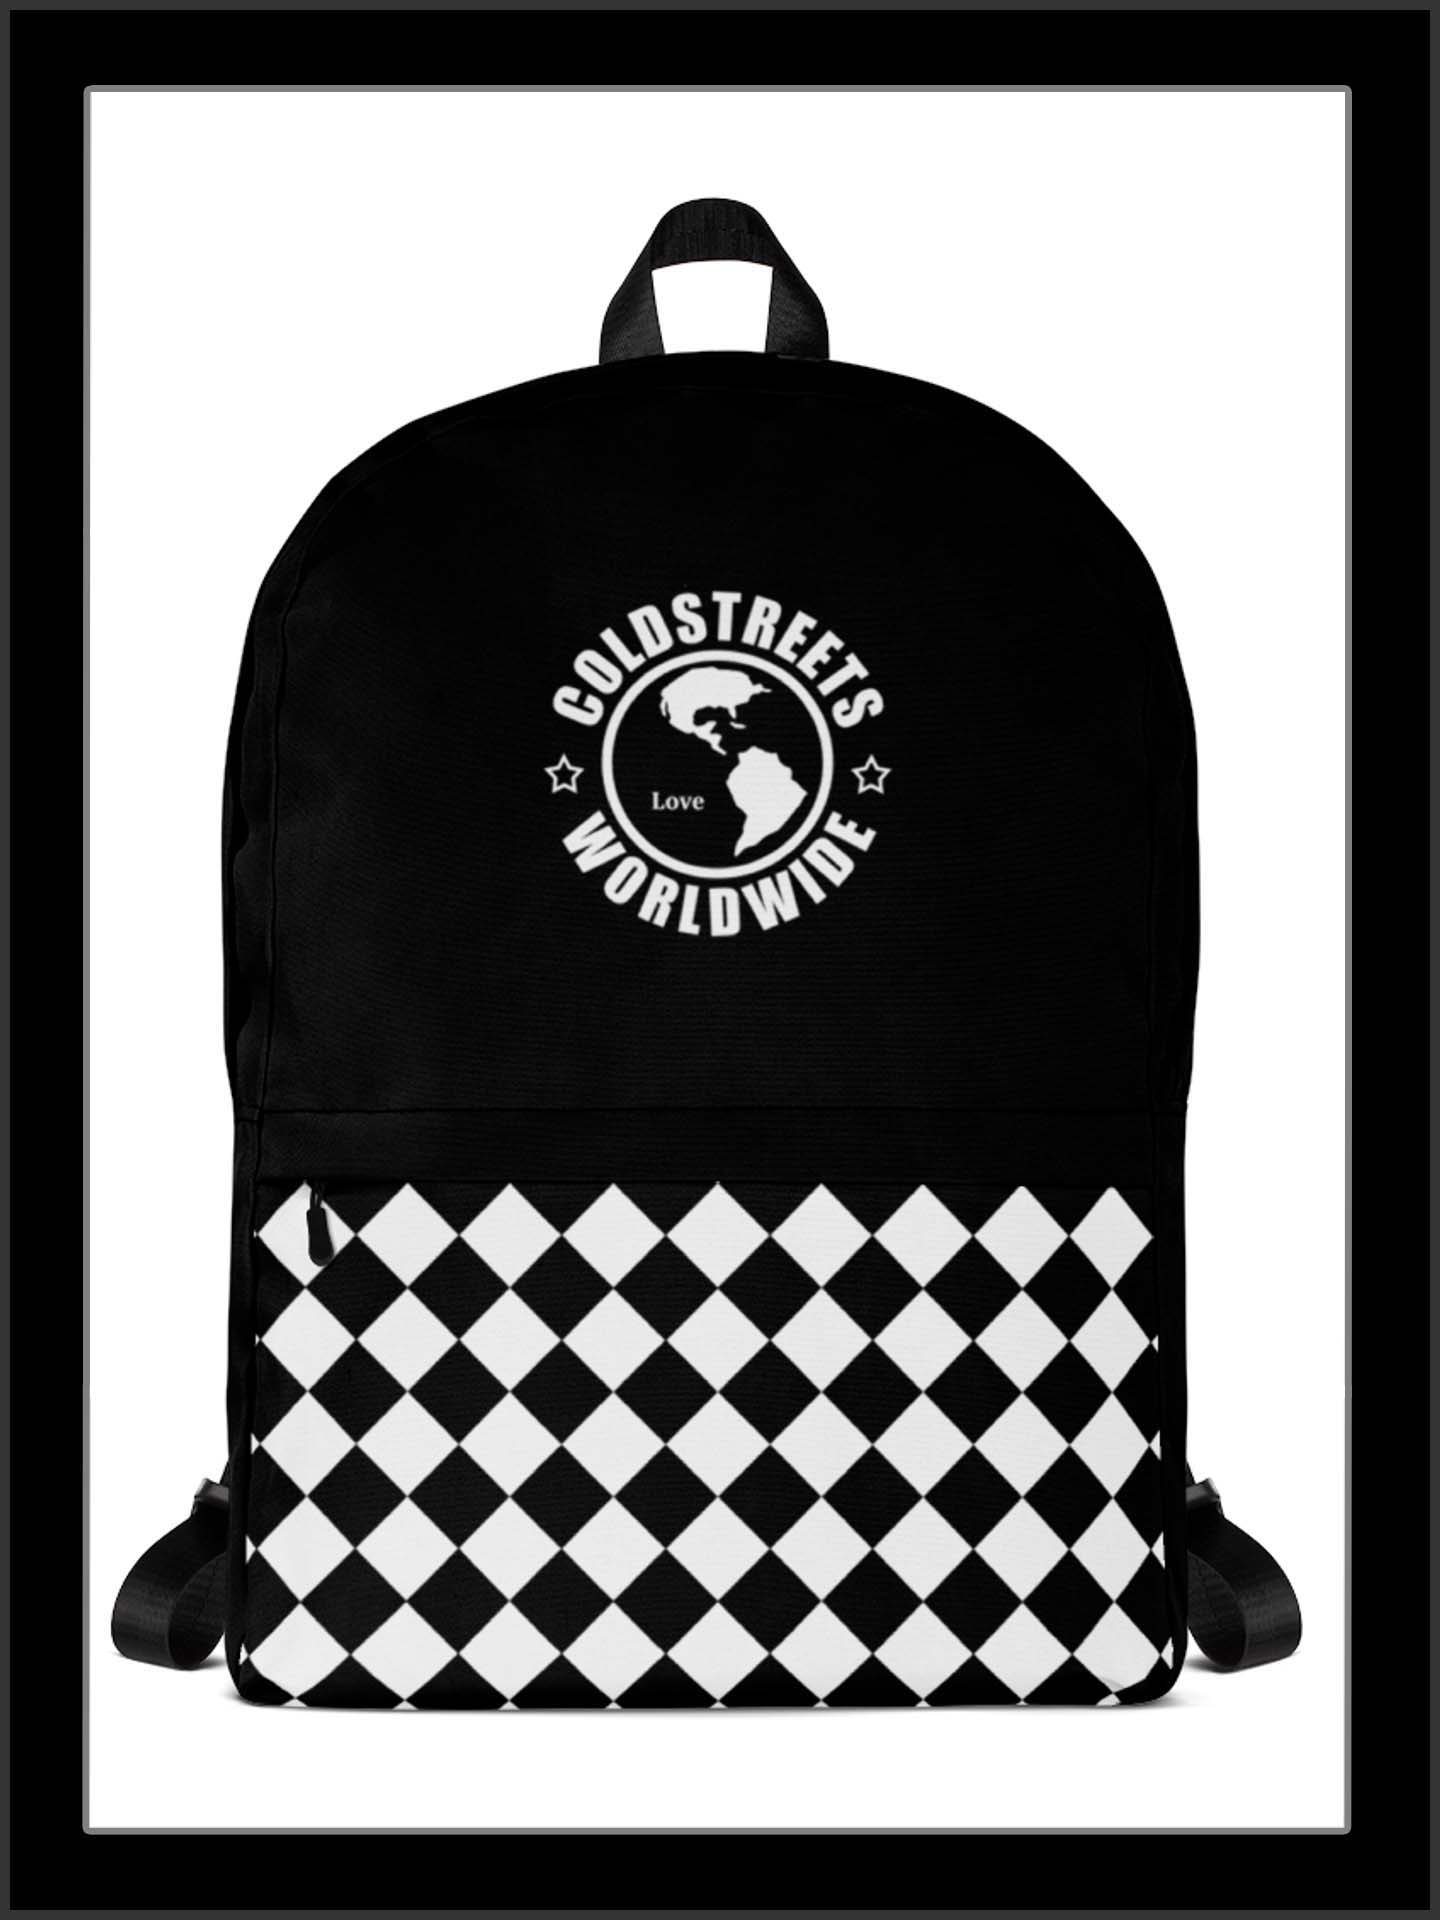 Cold Streets Texas Backpacks